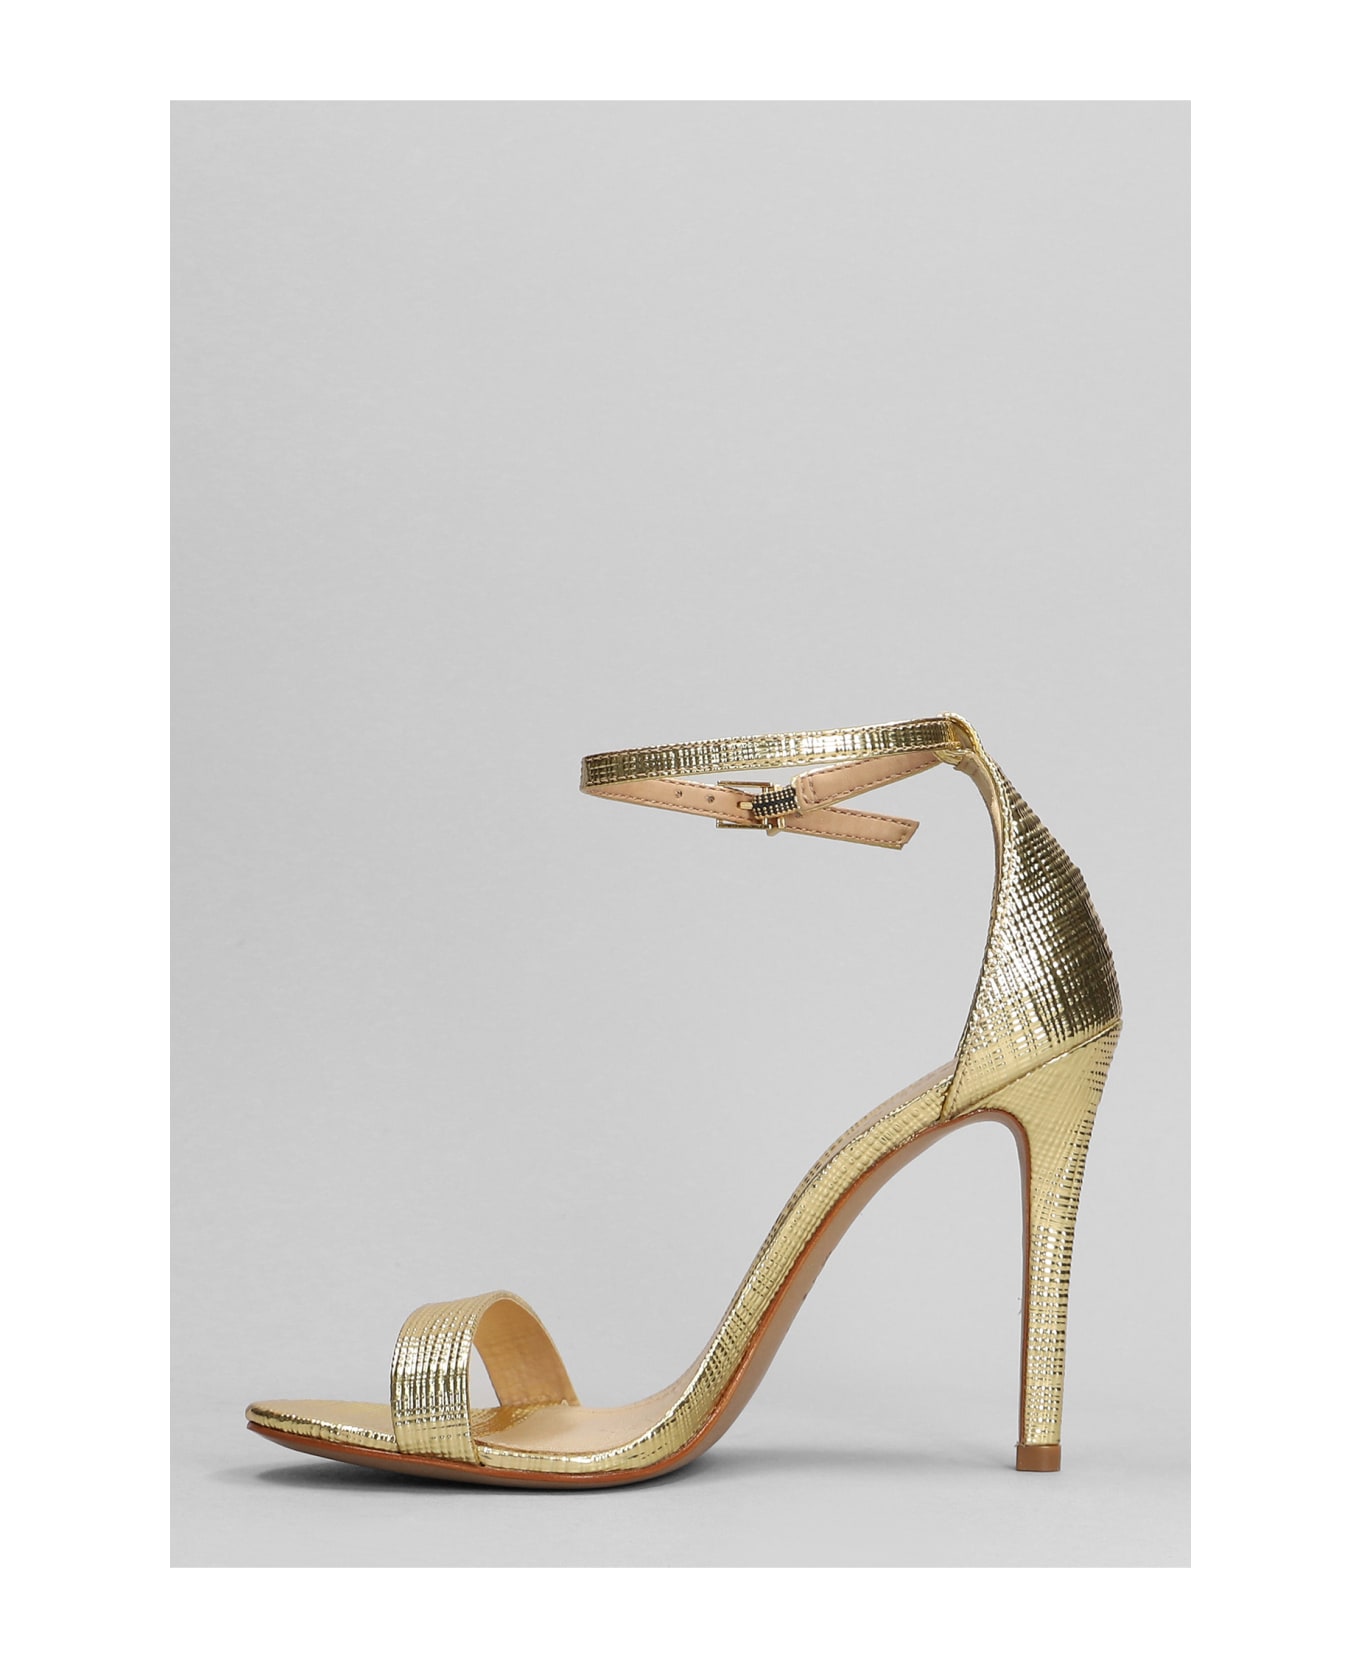 Schutz Sandals In Gold Leather - gold サンダル